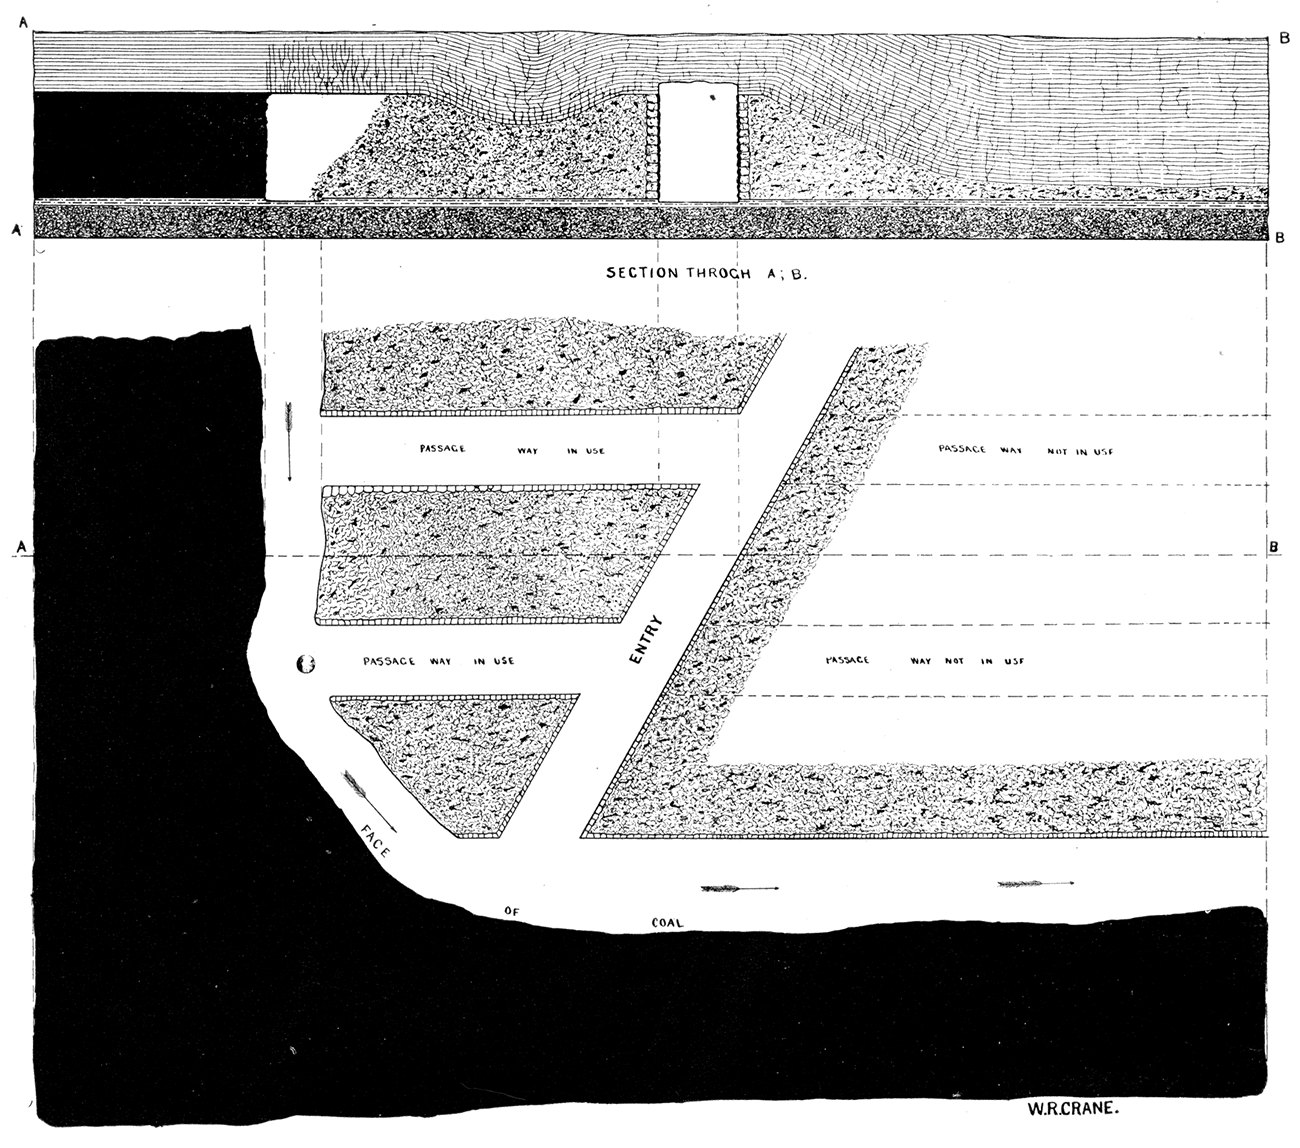 Vertical section and horizontal plan of long wall system of mining. 